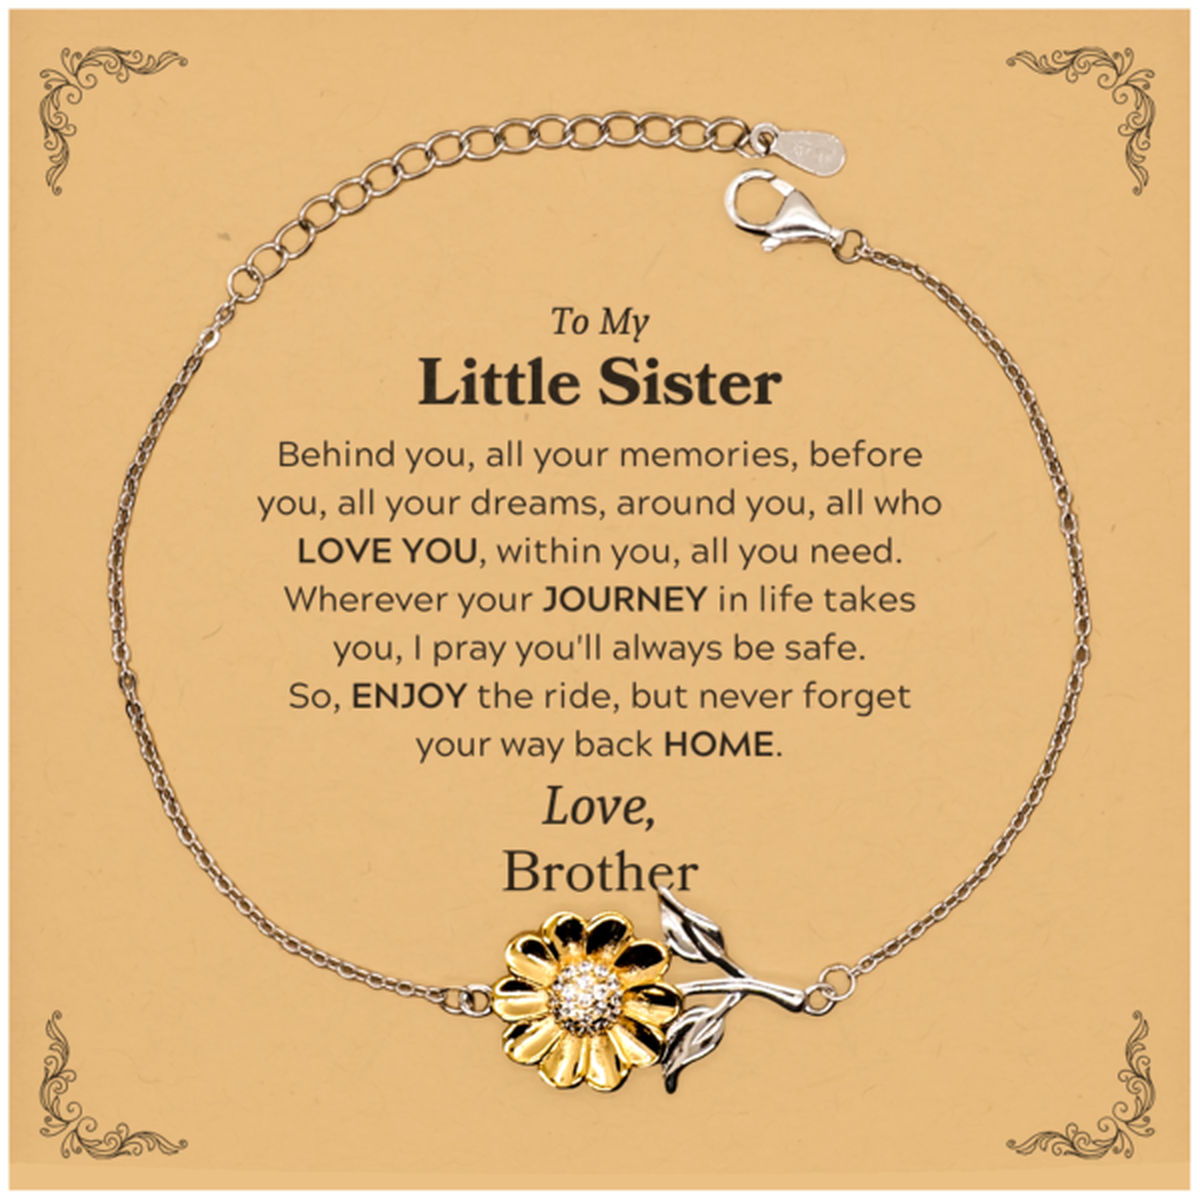 To My Little Sister Graduation Gifts from Brother, Little Sister Sunflower Bracelet Christmas Birthday Gifts for Little Sister Behind you, all your memories, before you, all your dreams. Love, Brother